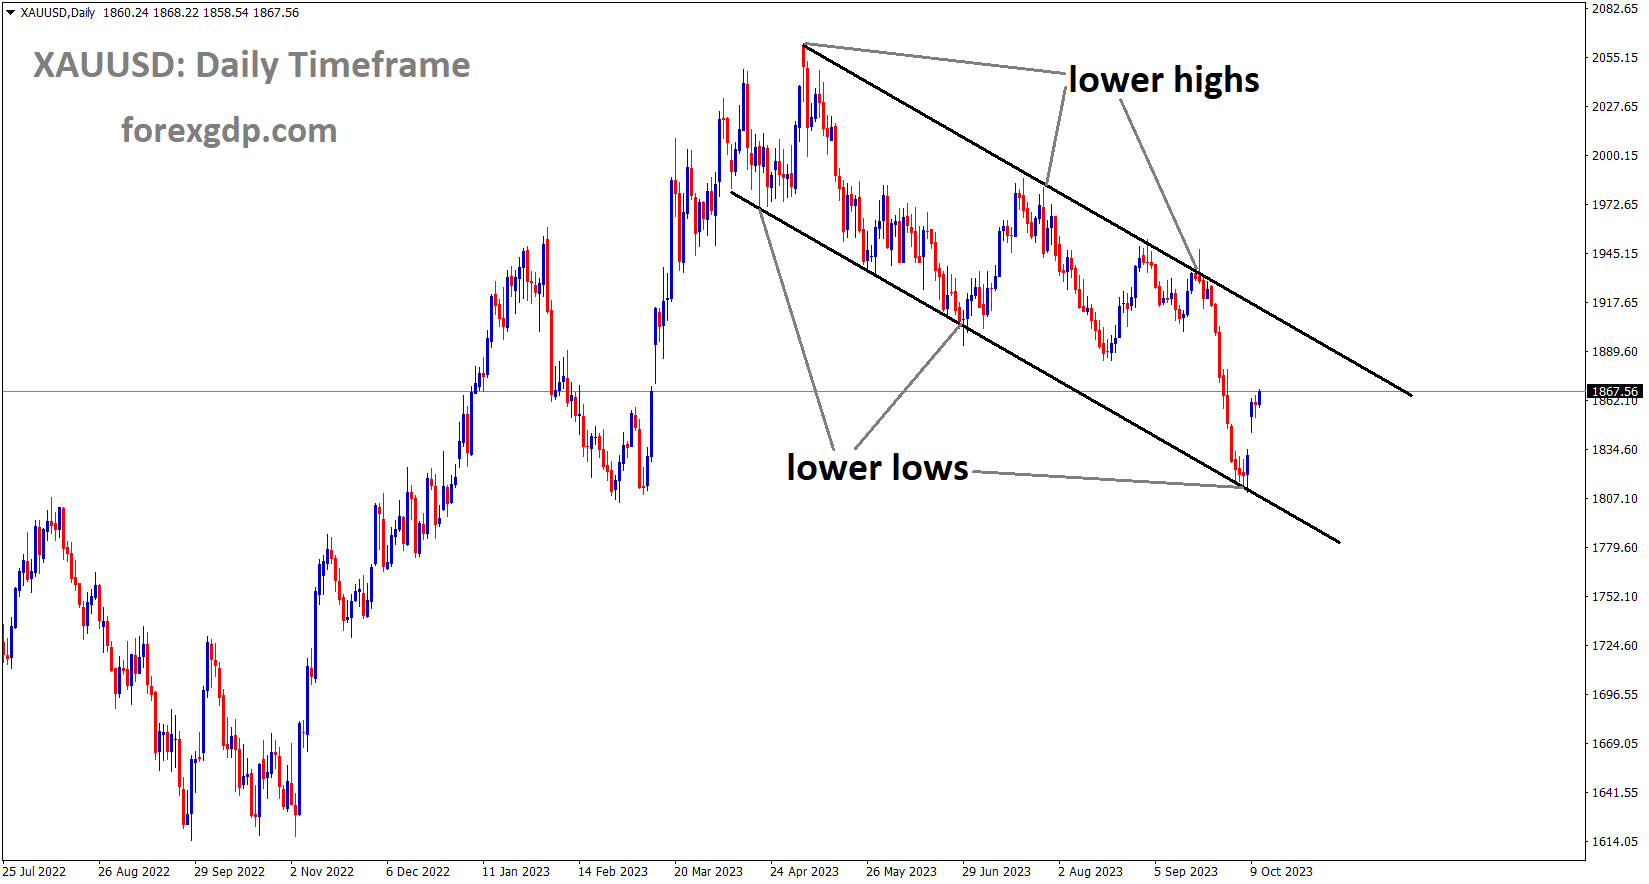 XAUUSD Gold Price is moving in the Descending channel and the market has rebounded from the lower low area of the channel